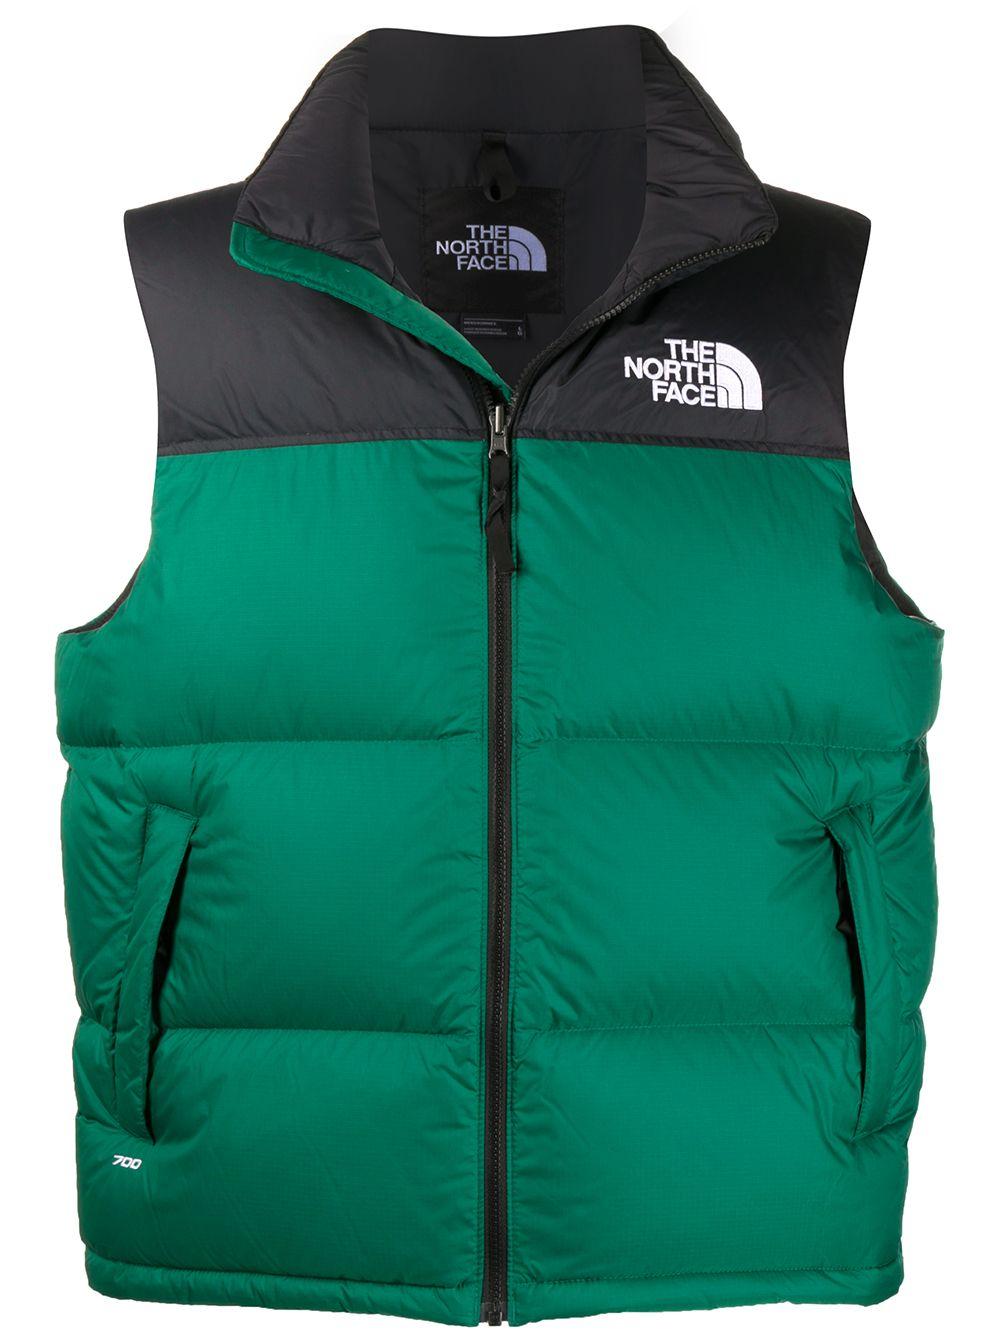 The North Face Puffy Logo Gilet in Green for Men - Lyst